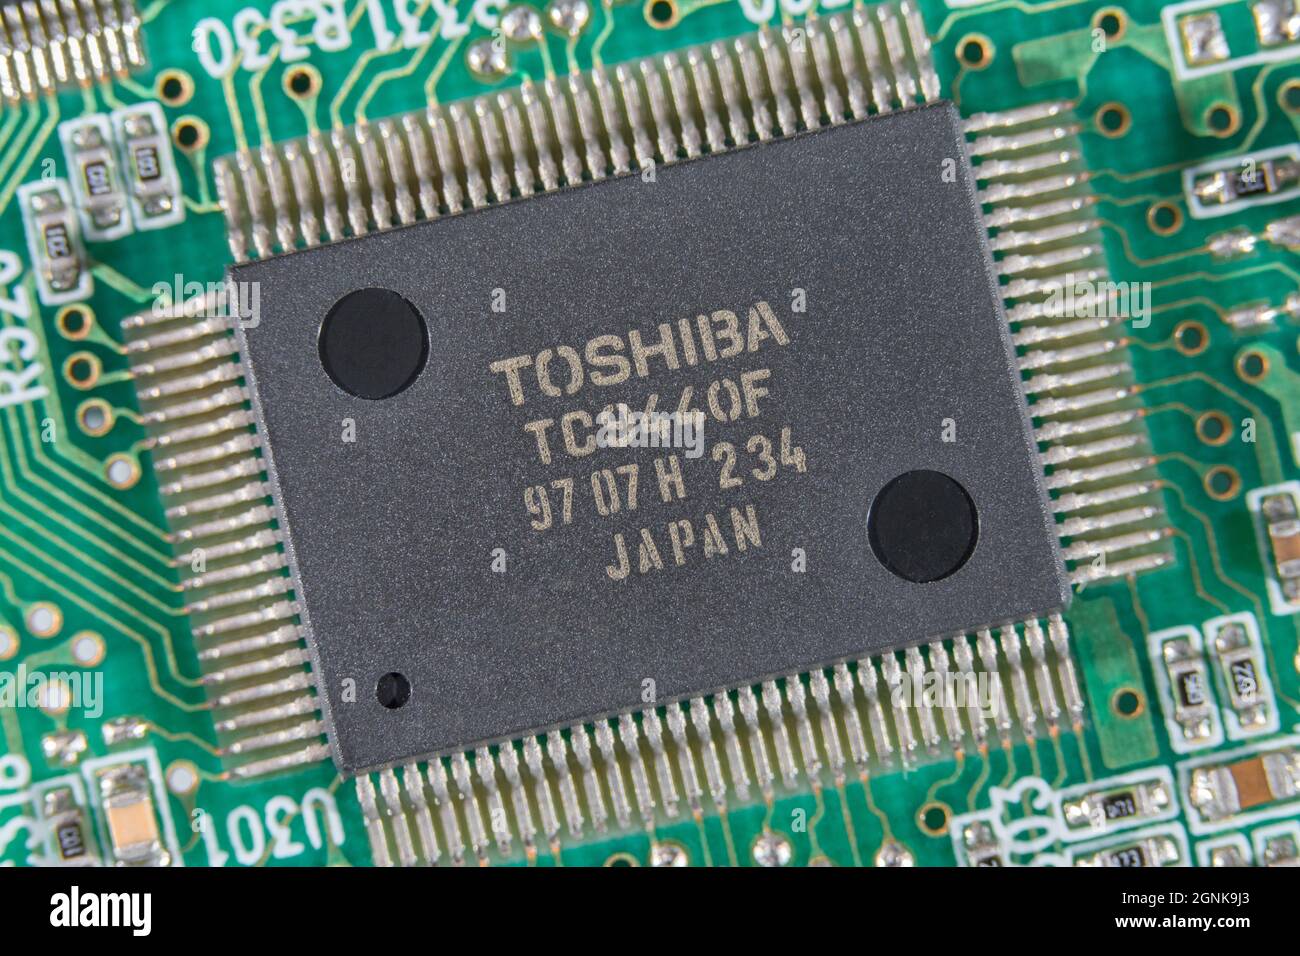 Gull-wing legs / pinouts of Toshiba integrated circuit / IC semiconductor on  green pcb circuit board. For electronics technology, world chip shortage Stock Photo